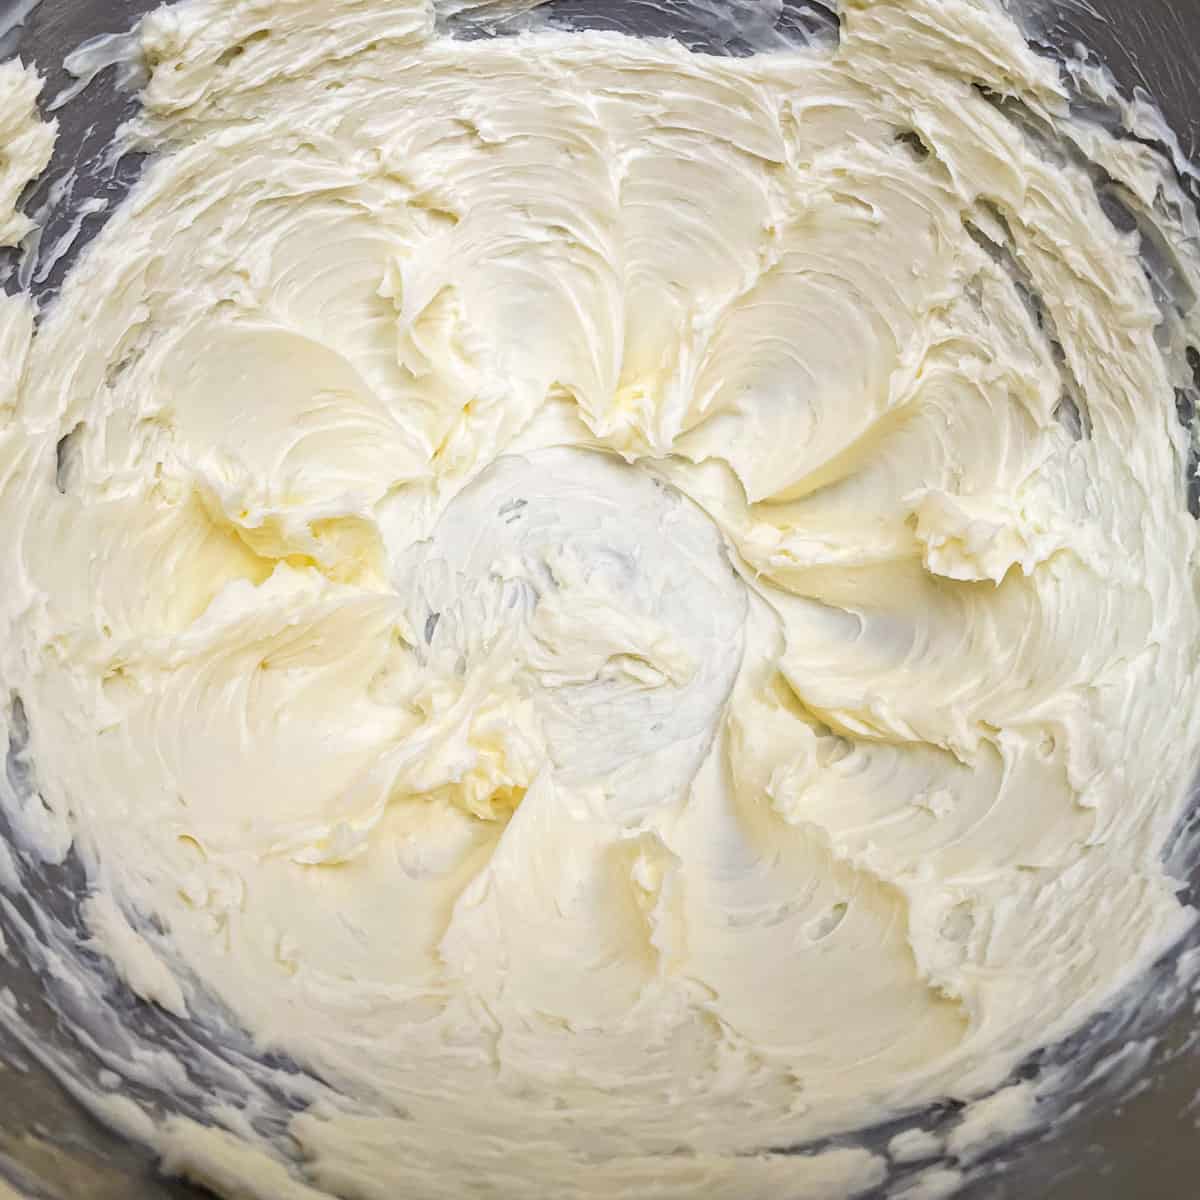 Creamed butter in a mixer bowl that has soft peaks along the sides of the bowl.